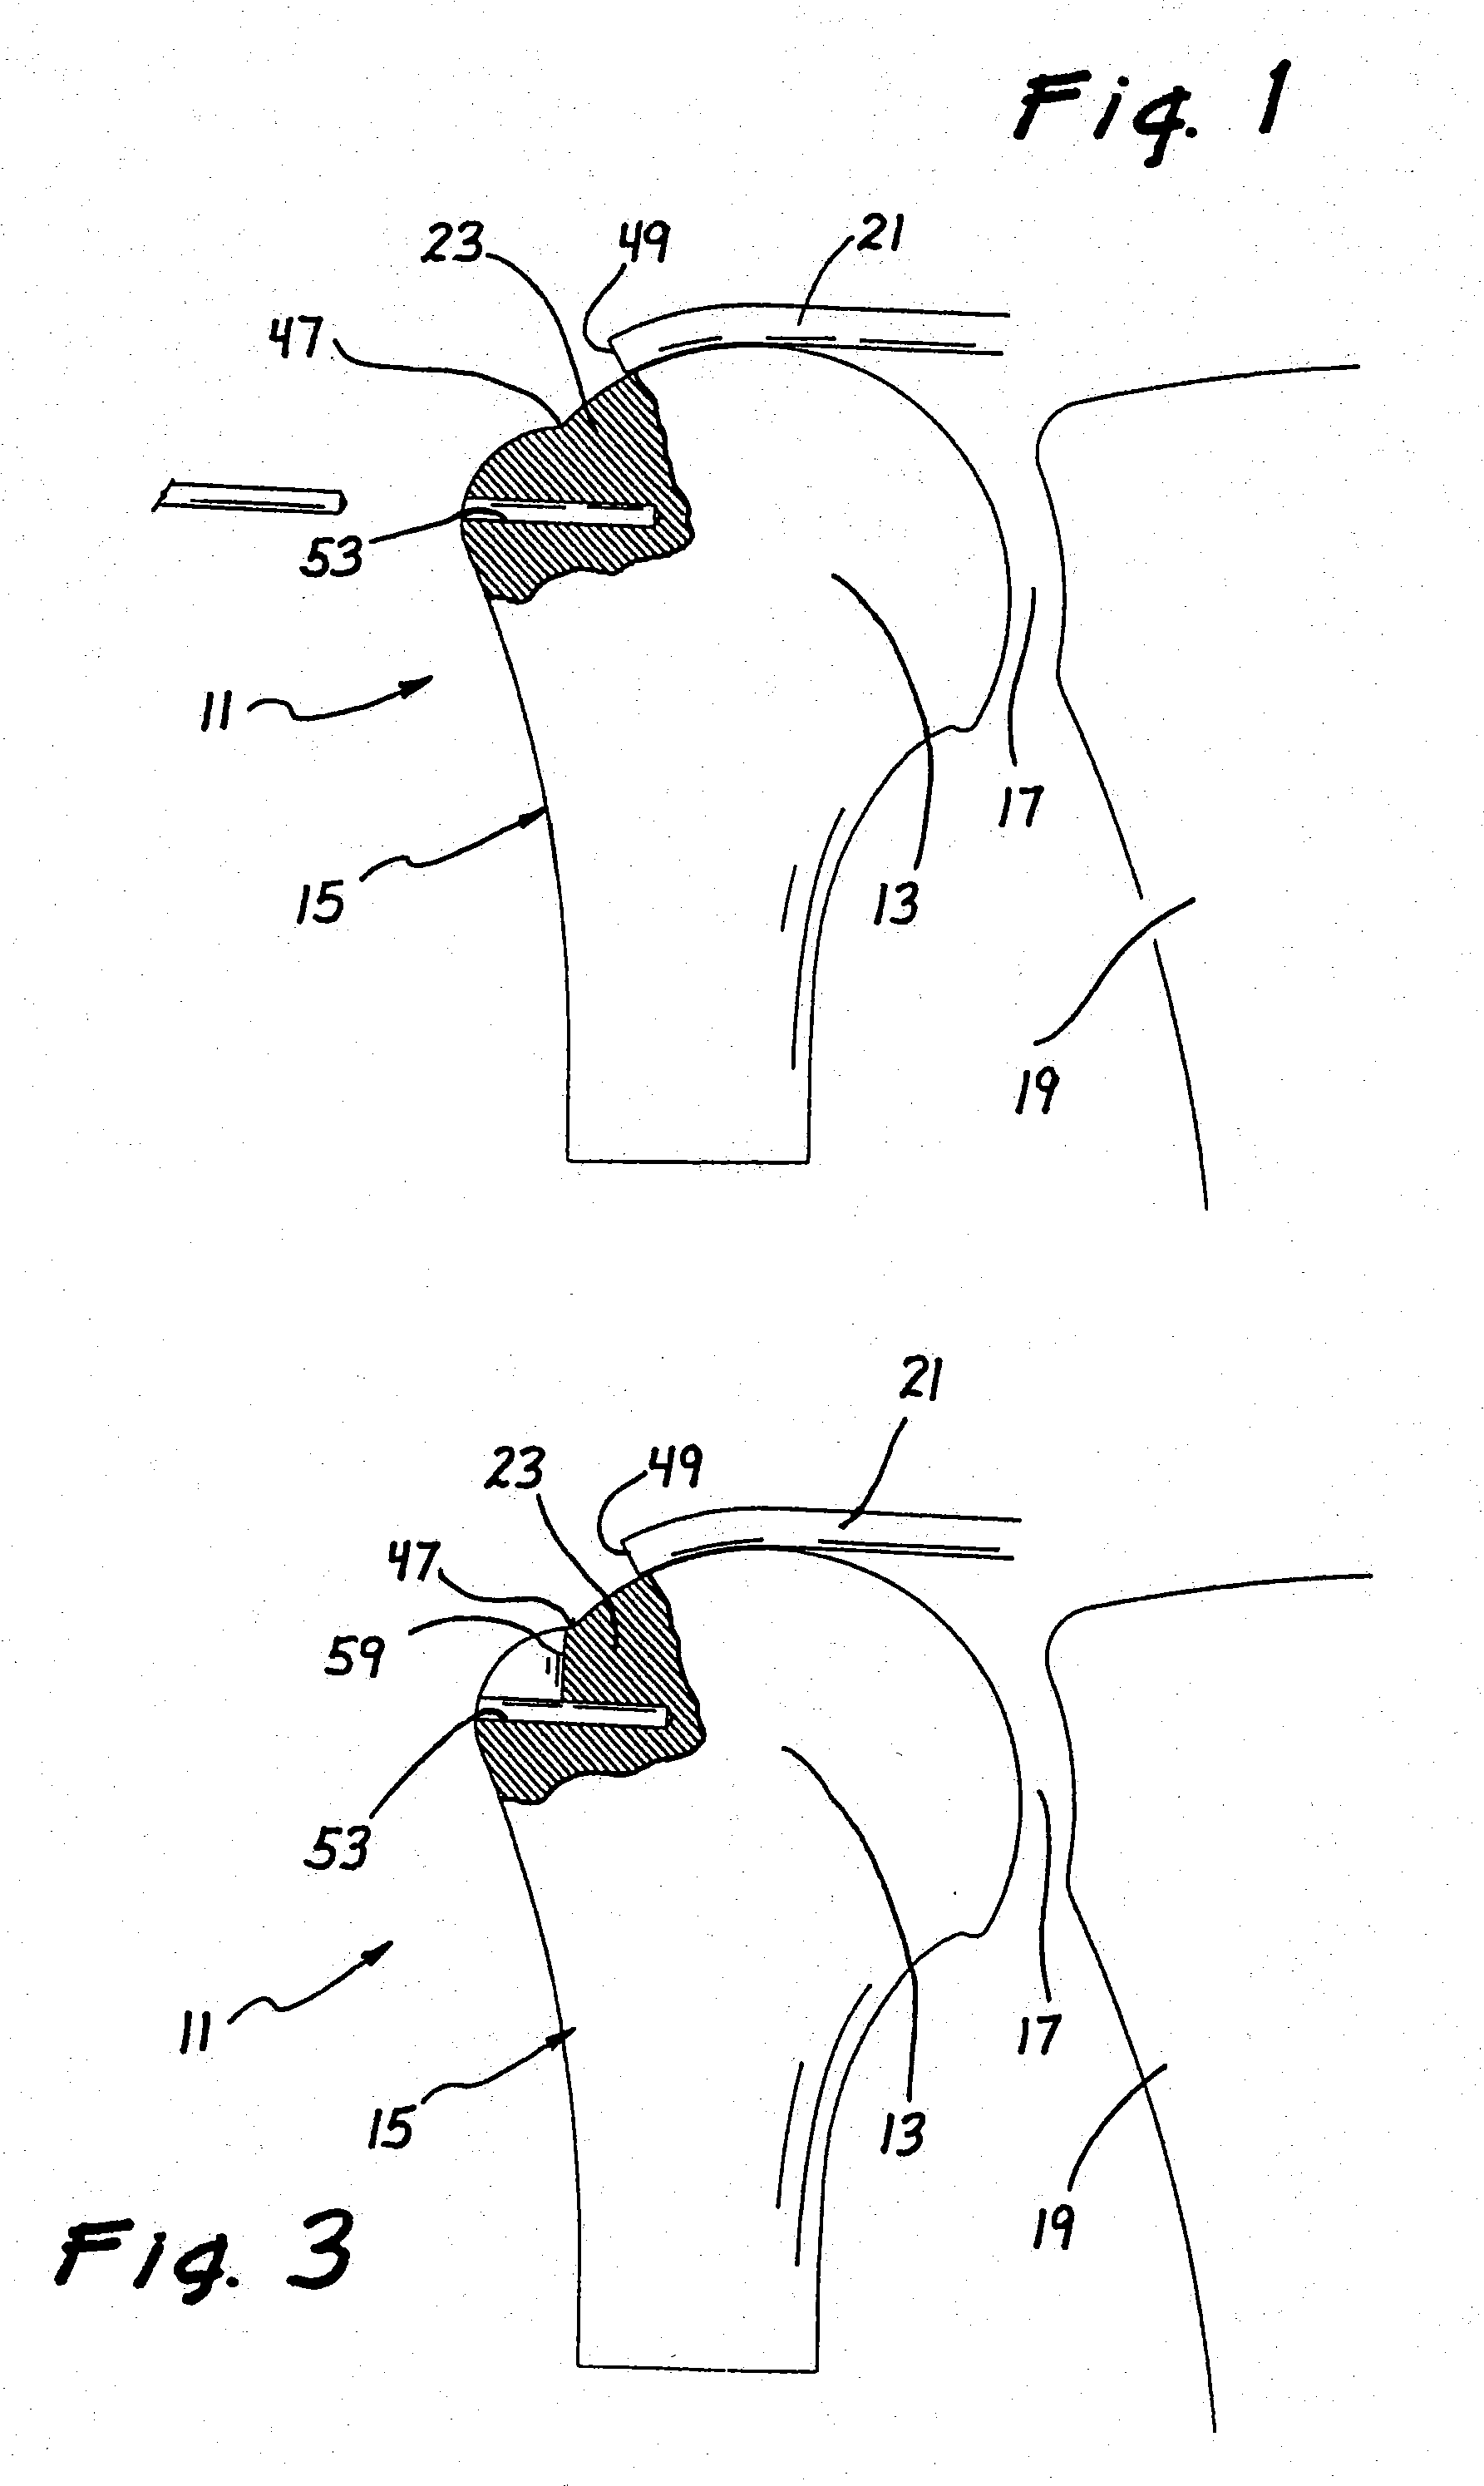 Methods for attaching connective tissues to bone using a multi-component anchor